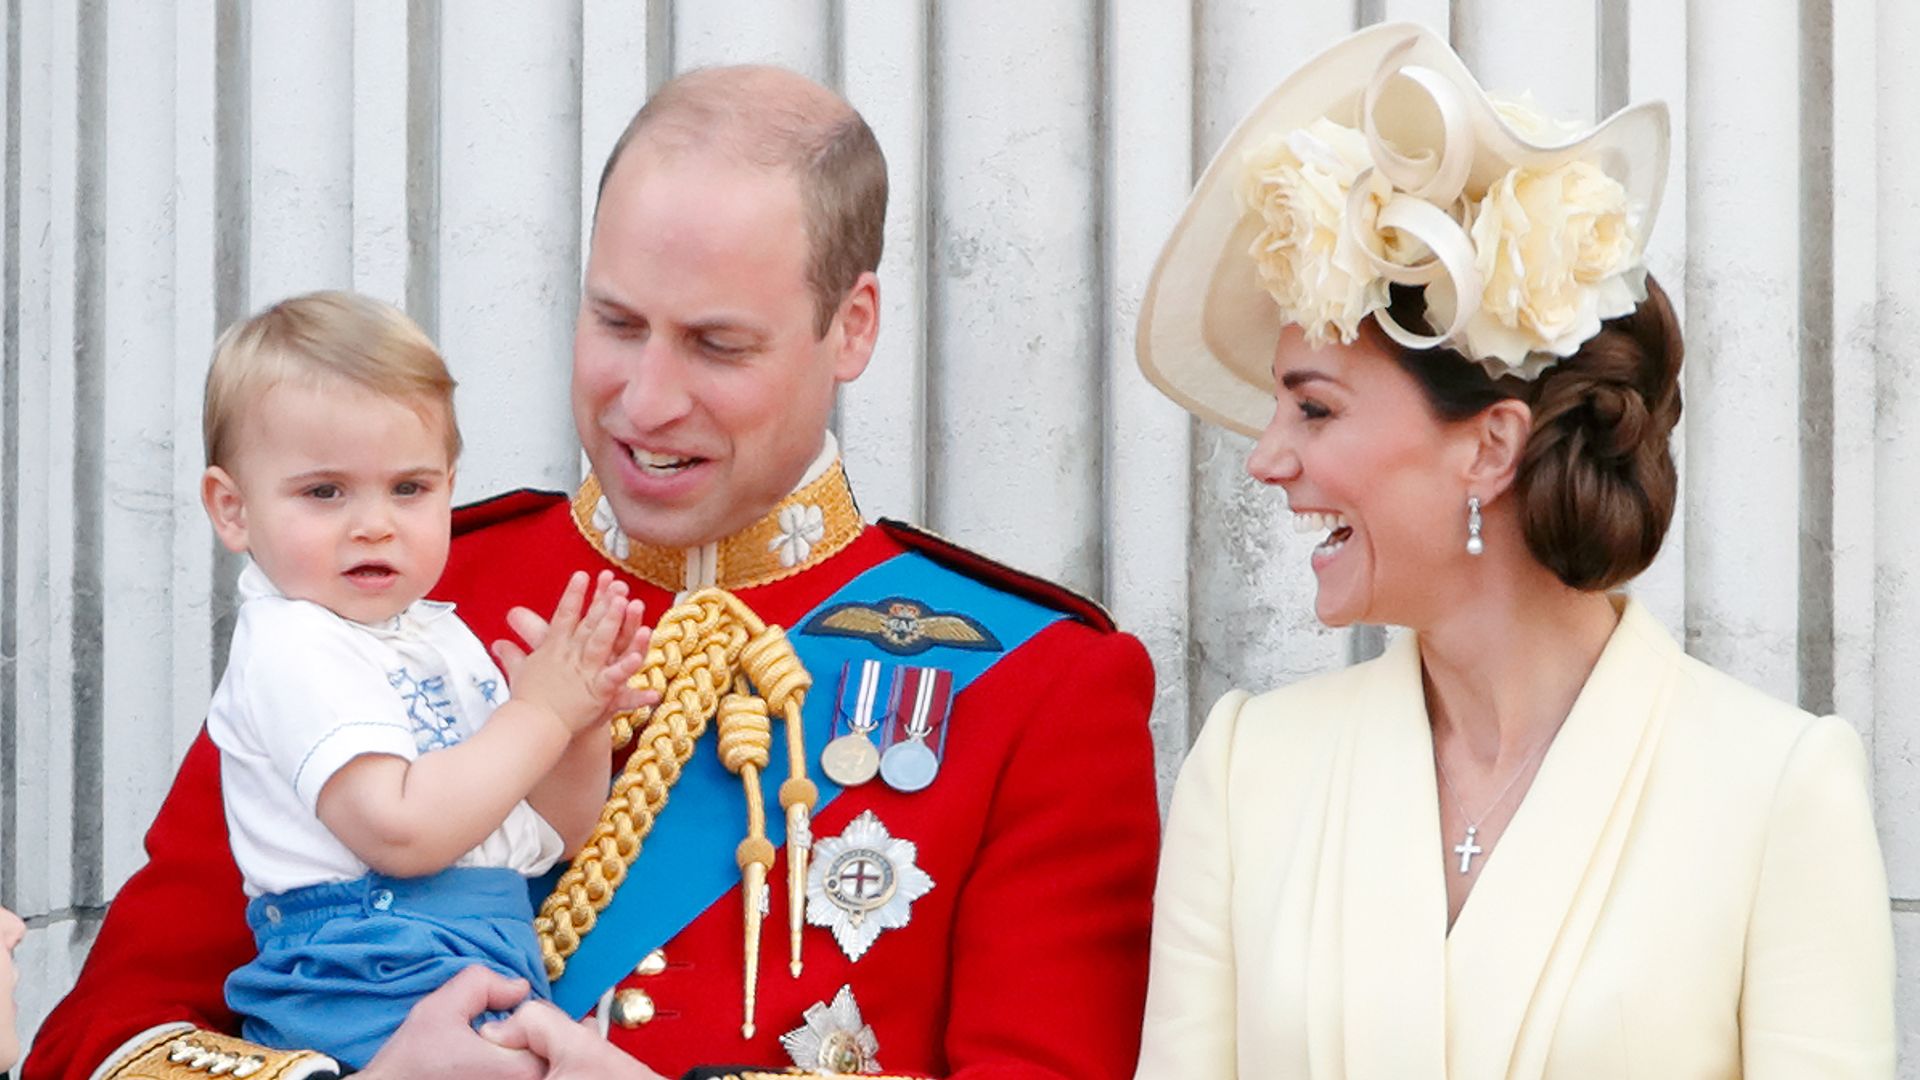 Relive the royals' first Trooping appearances in glorious photos